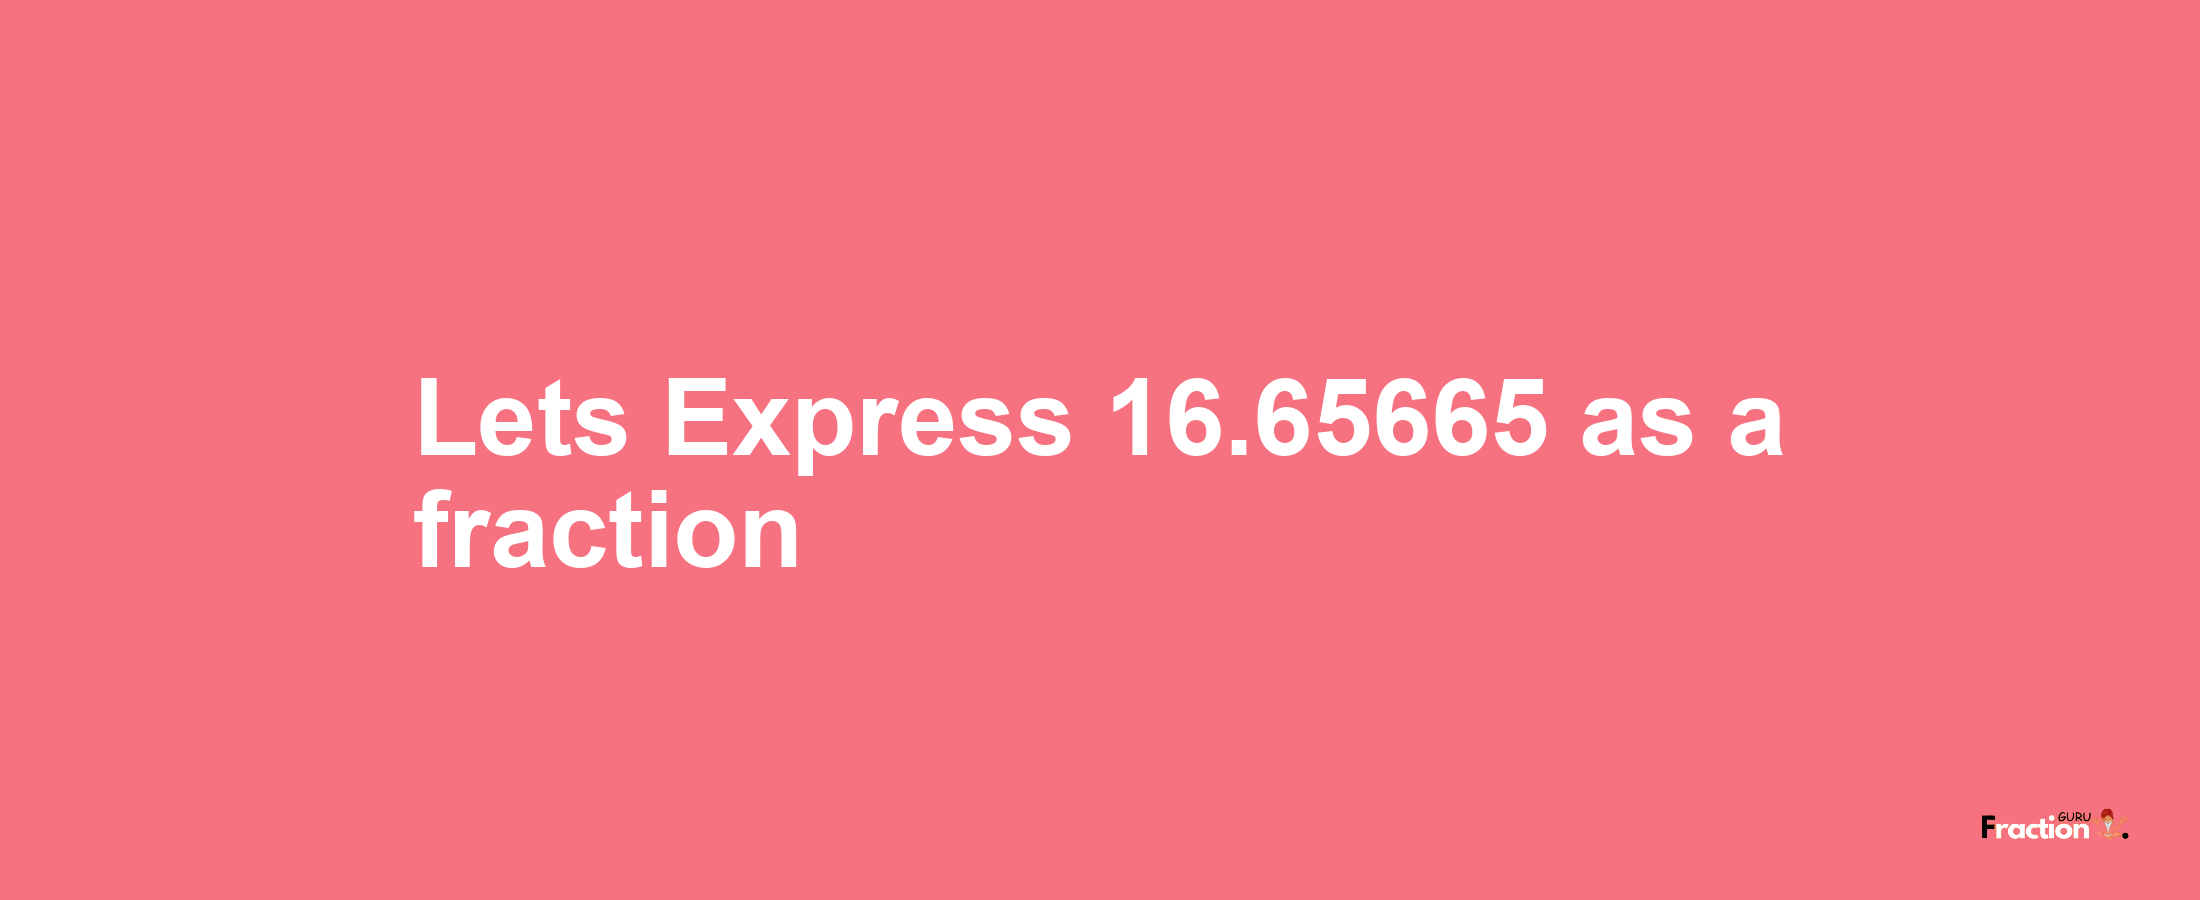 Lets Express 16.65665 as afraction